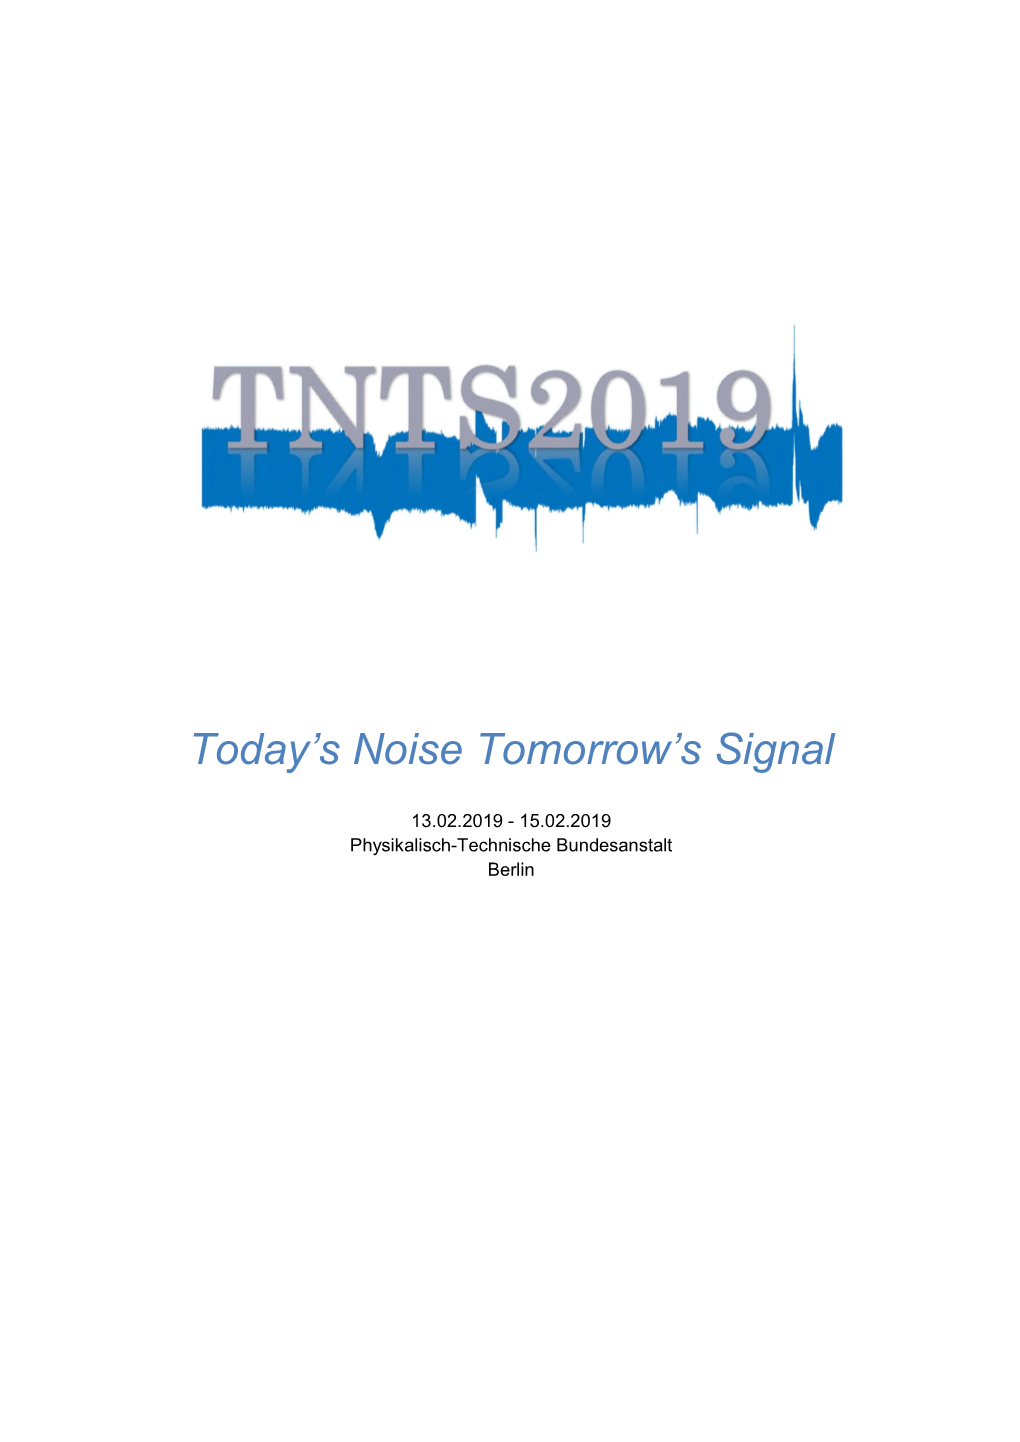 Today's Noise Tomorrow's Signal